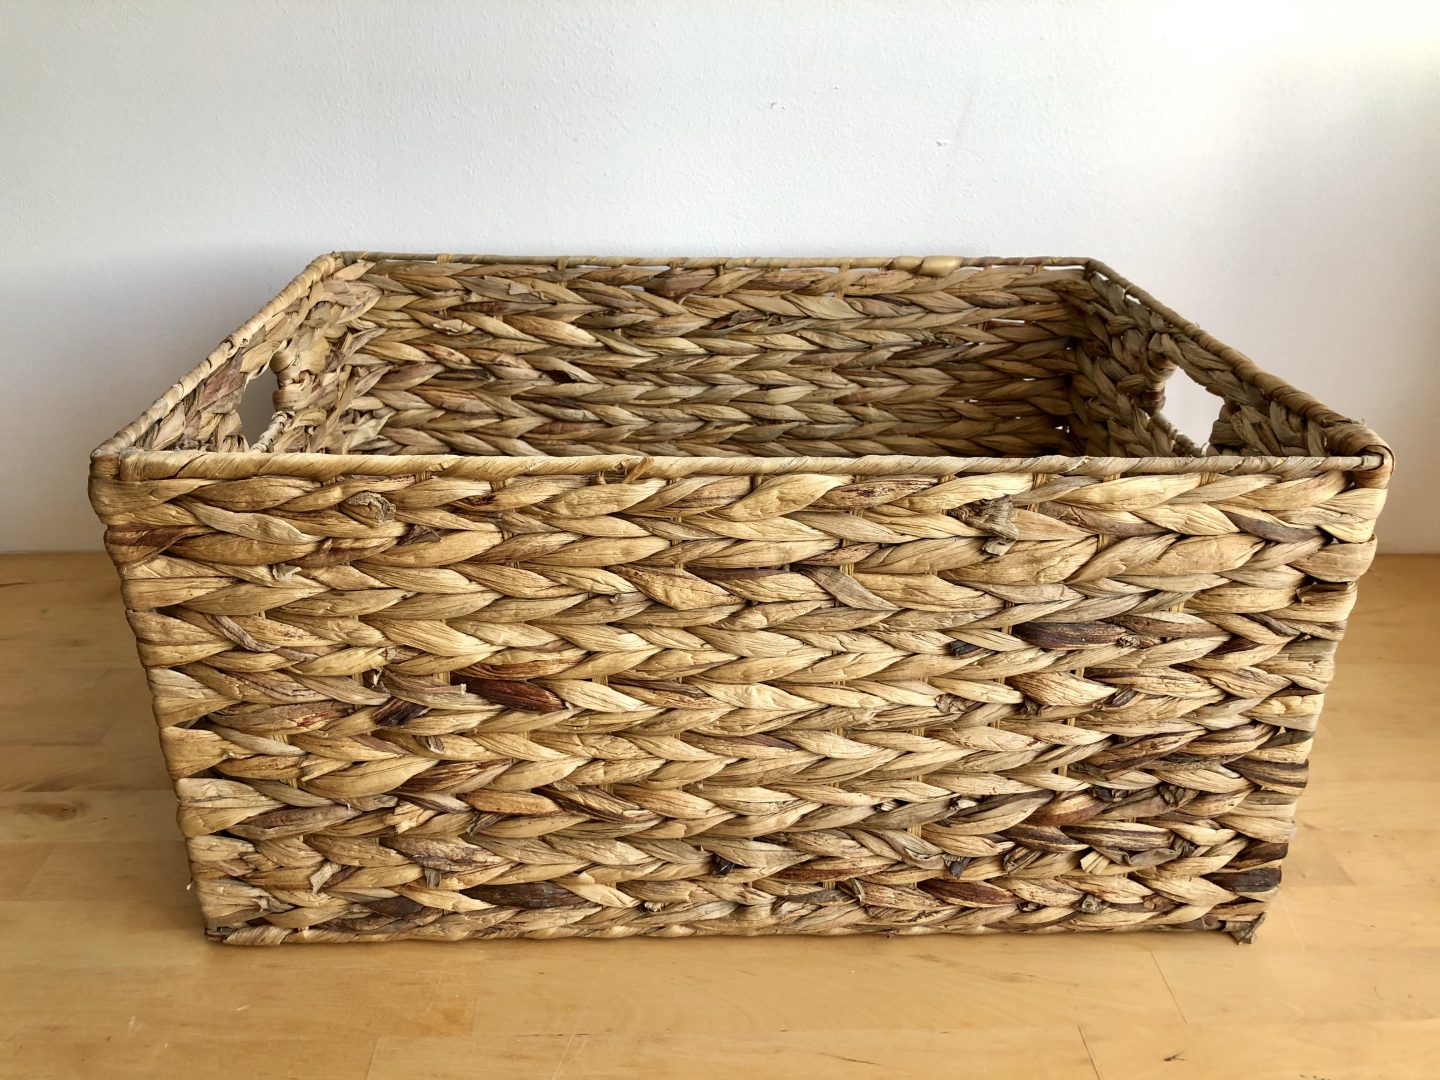 How to line a basket with handles